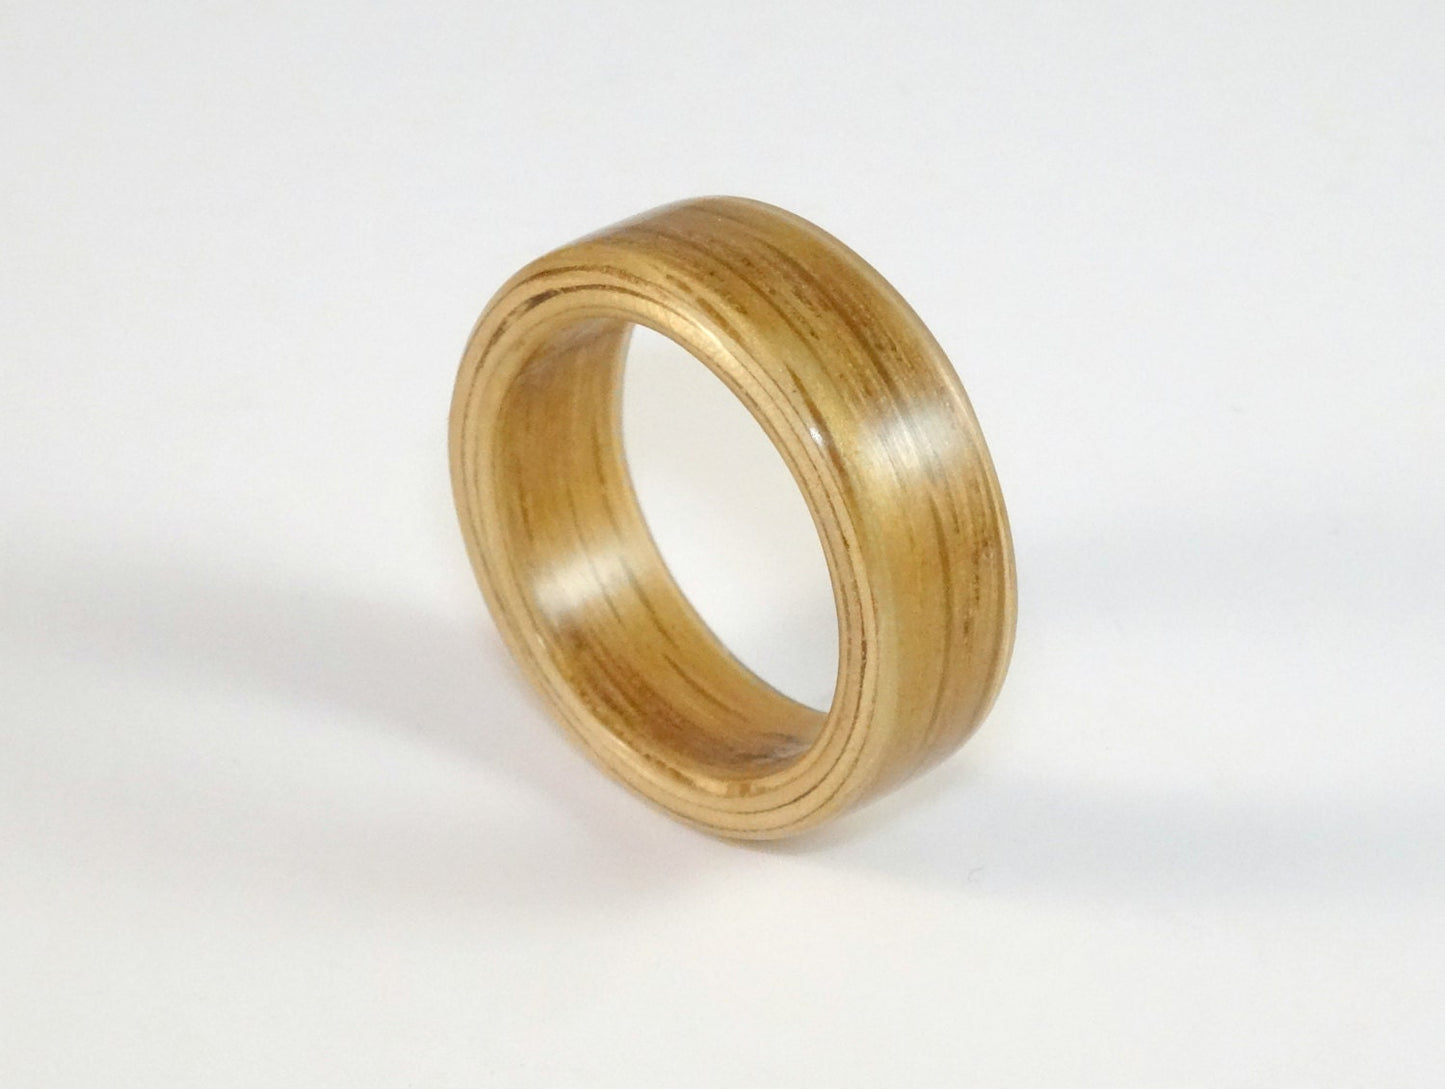 Oak Bent Wood Ring, Handmade to Order In Your UK or US Size.  Wooden Rings for Men or Women